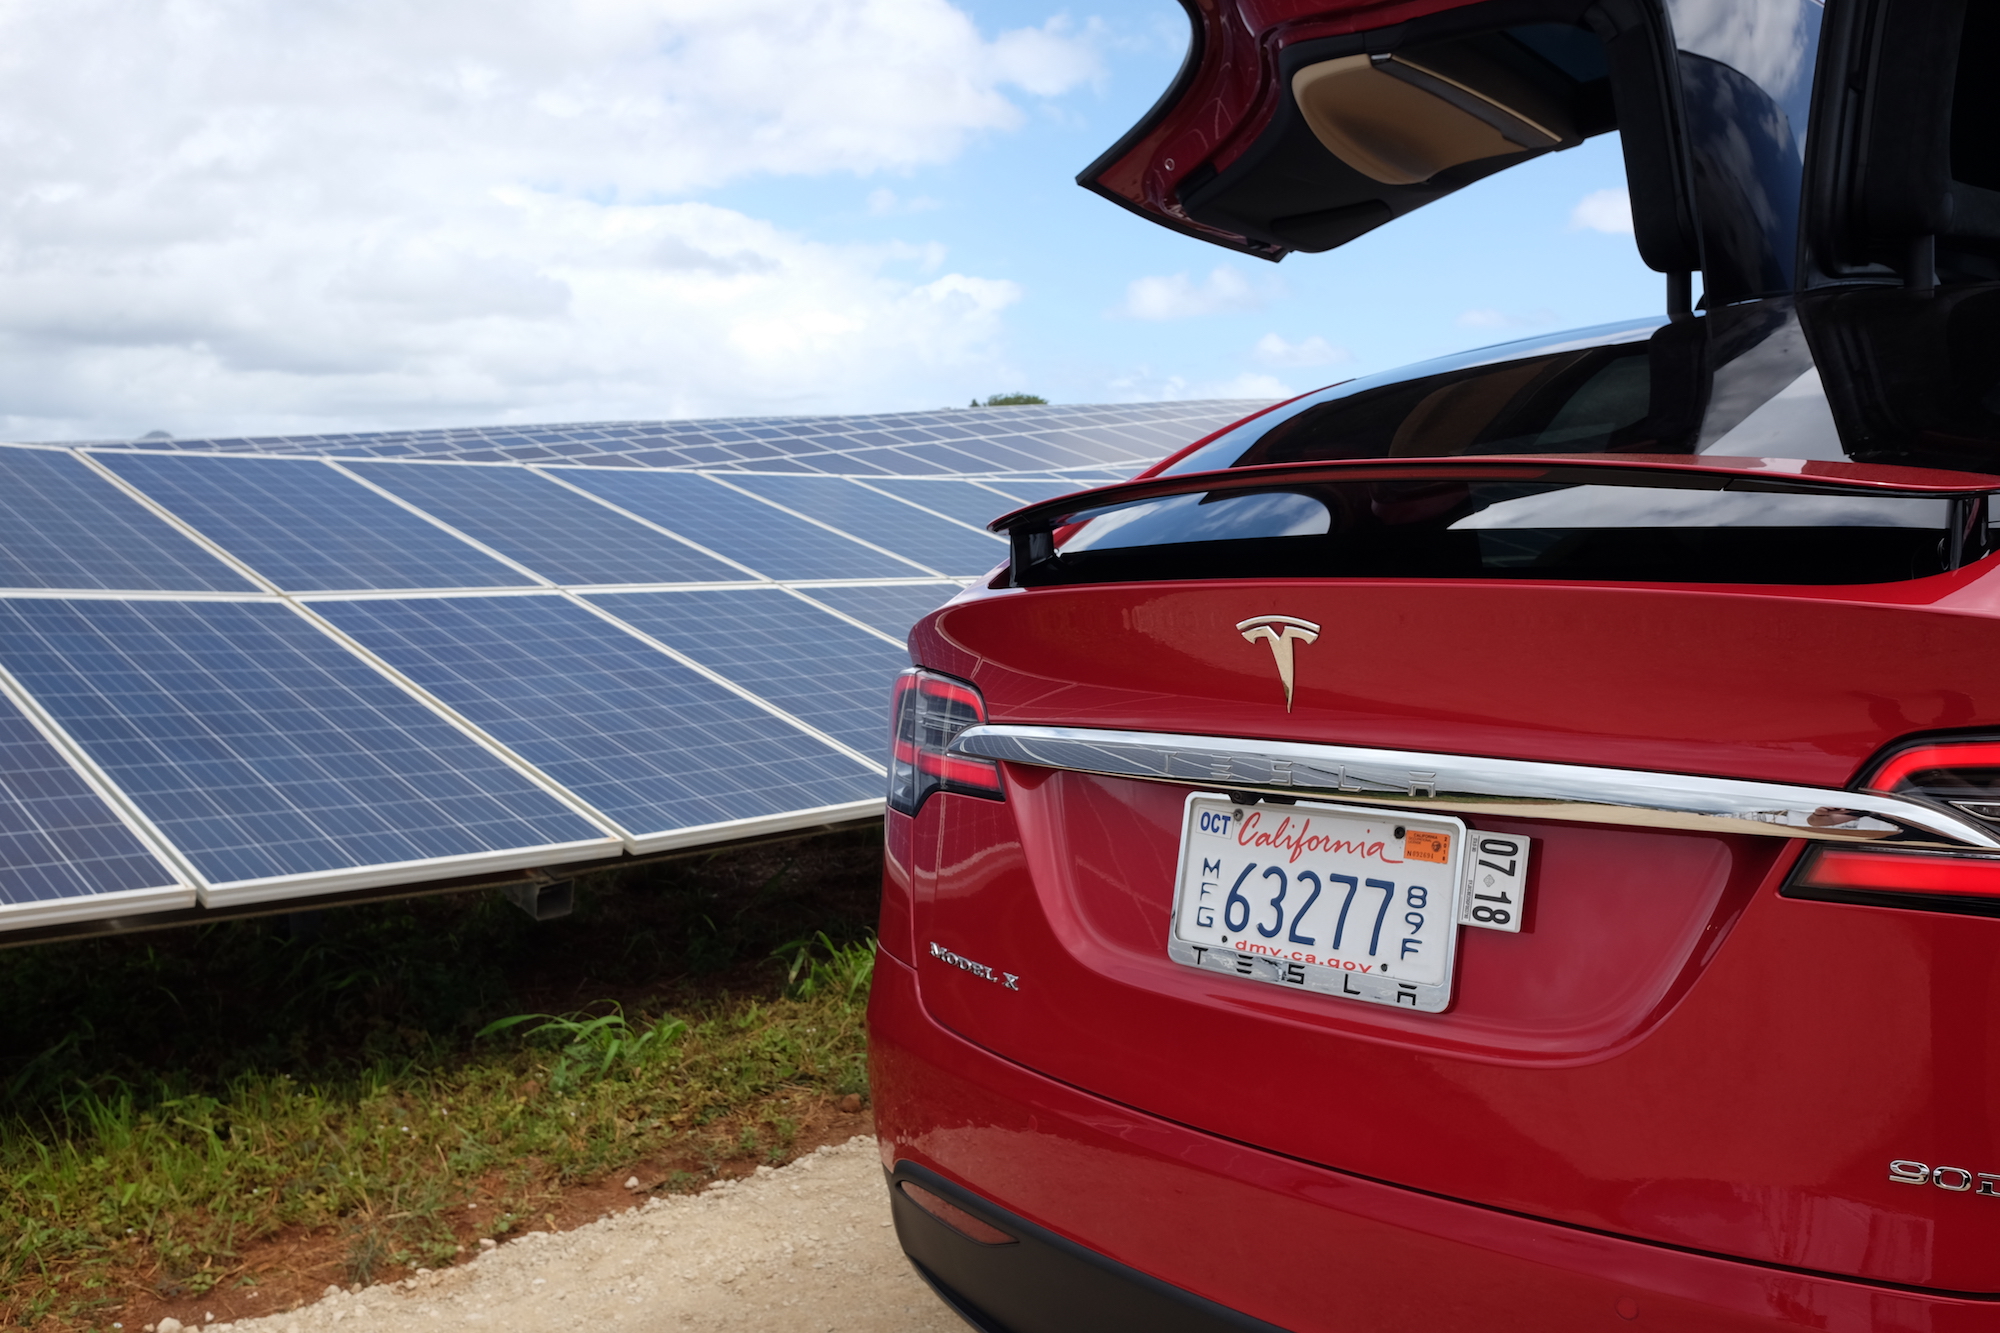 Tesla wants to sell electricity in Texas